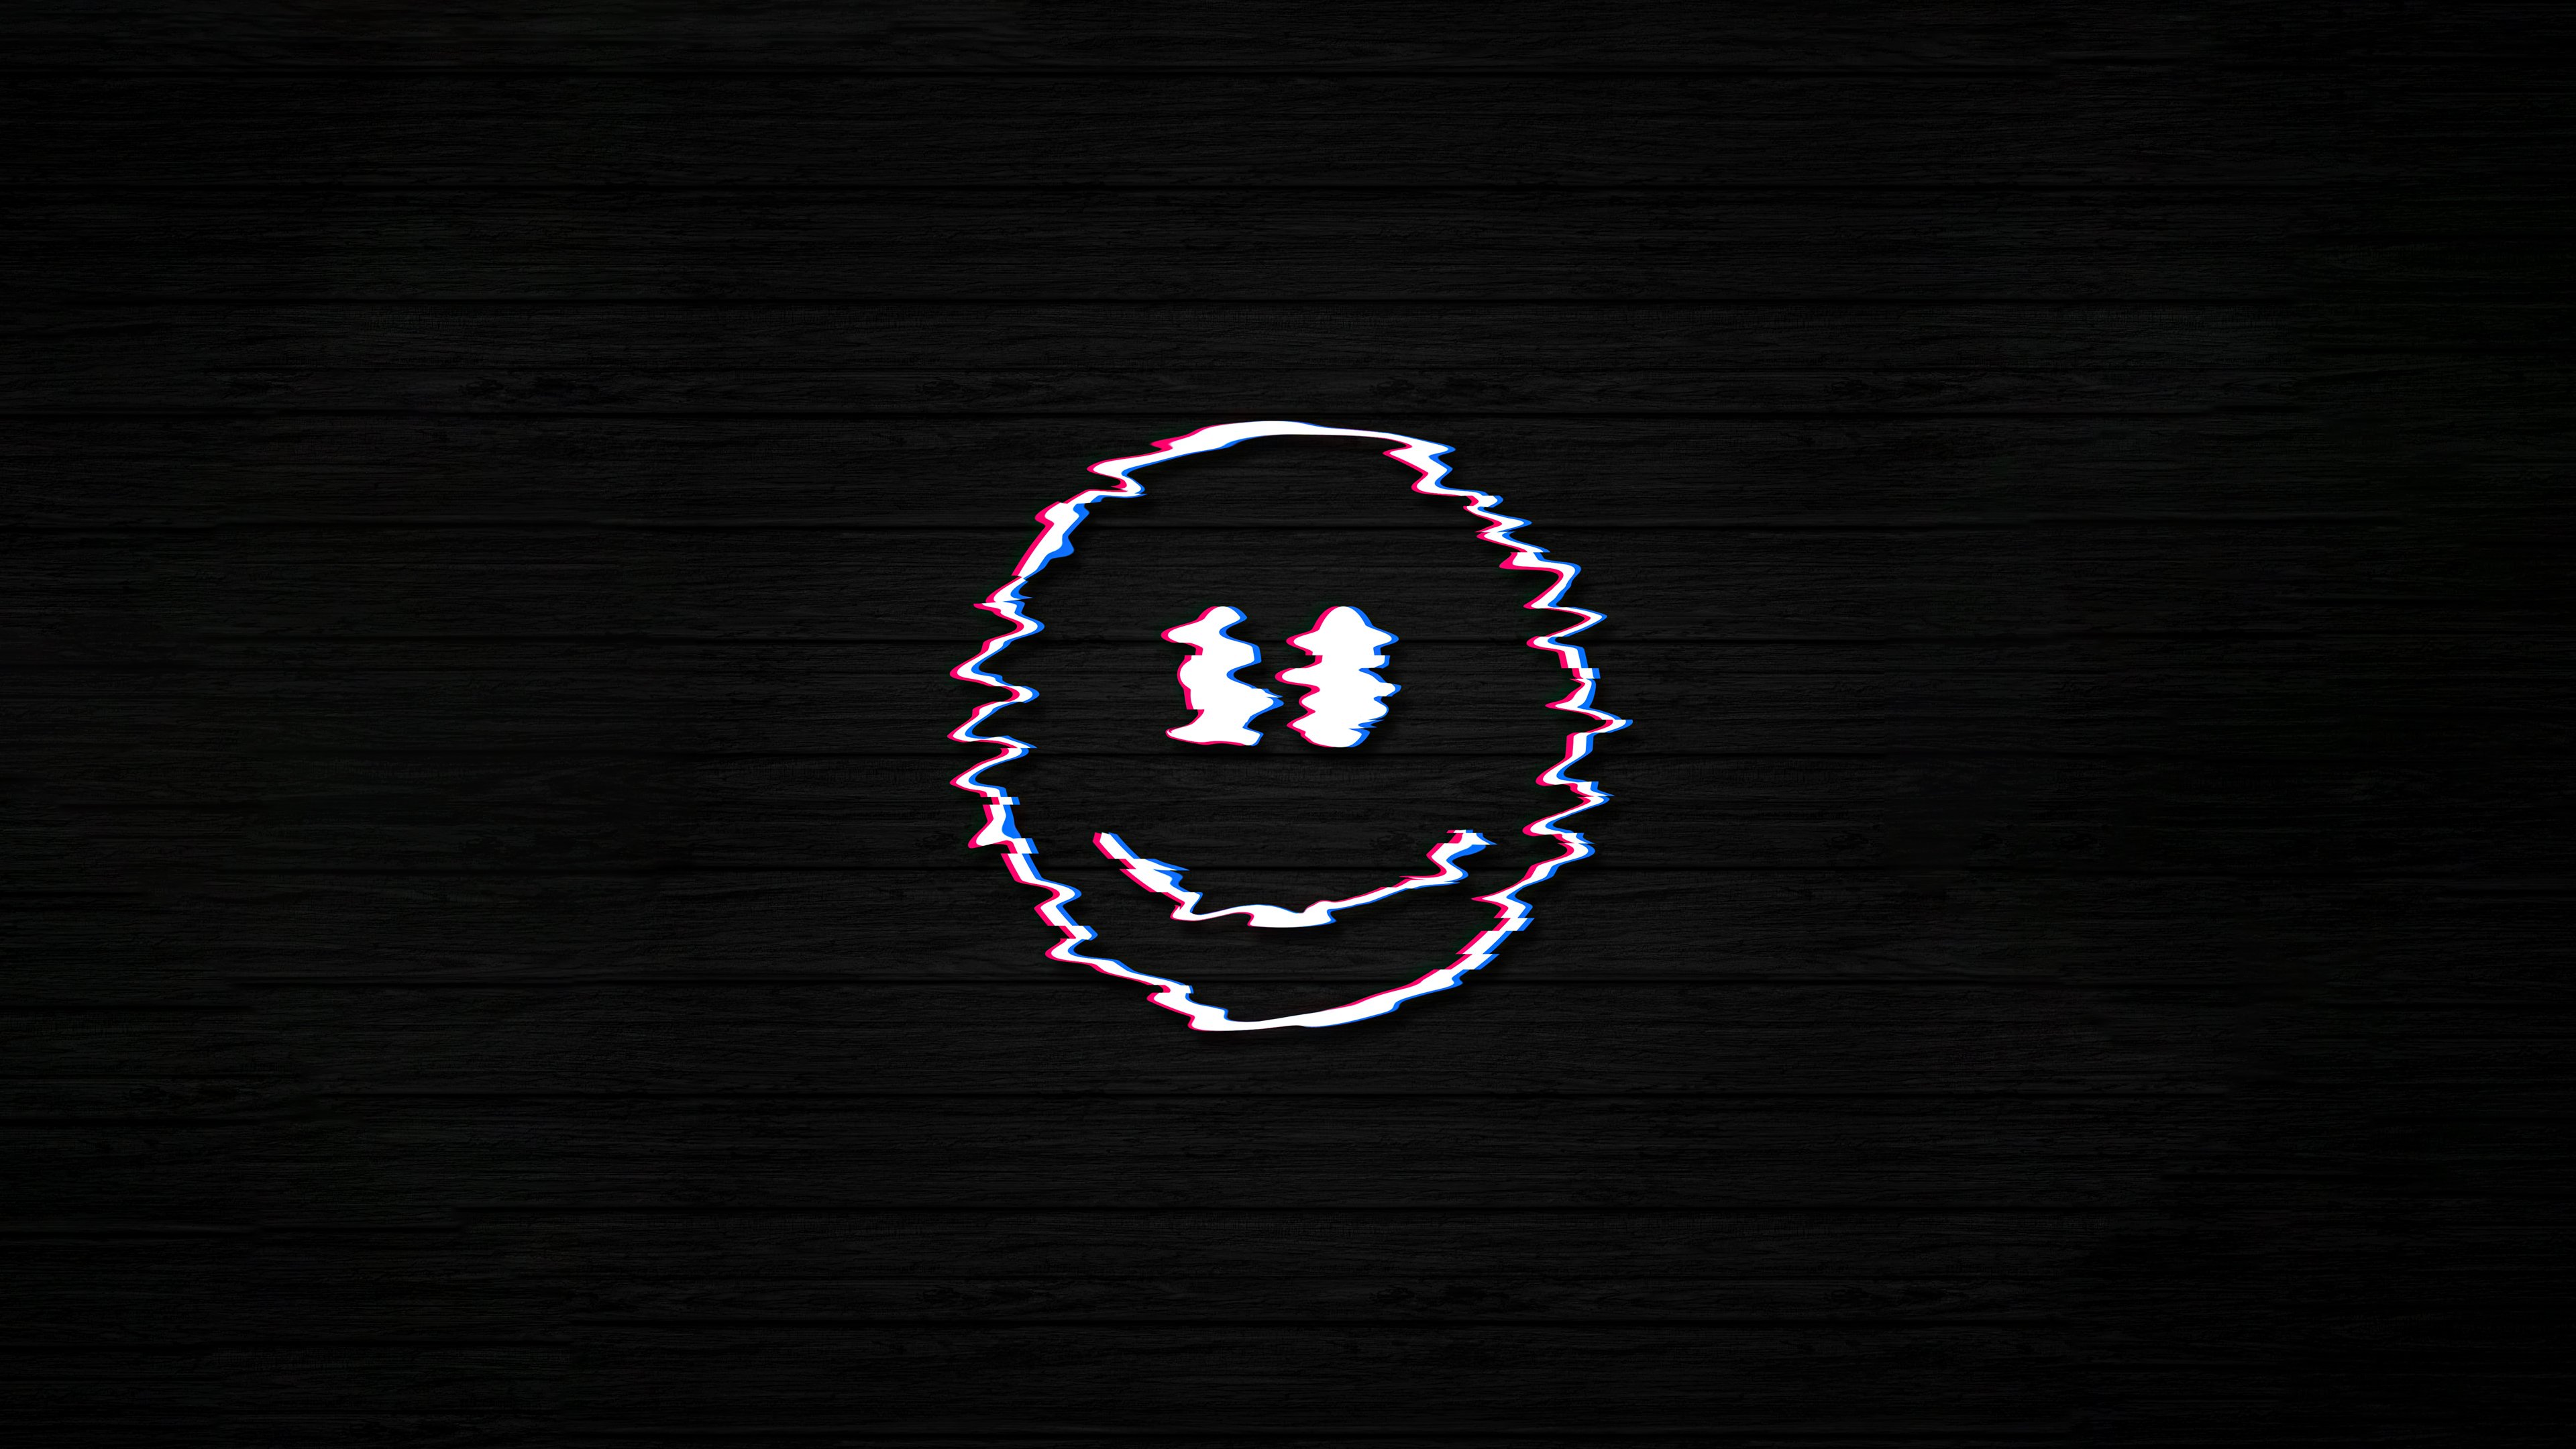 Wallpaper Smiley face with glitch